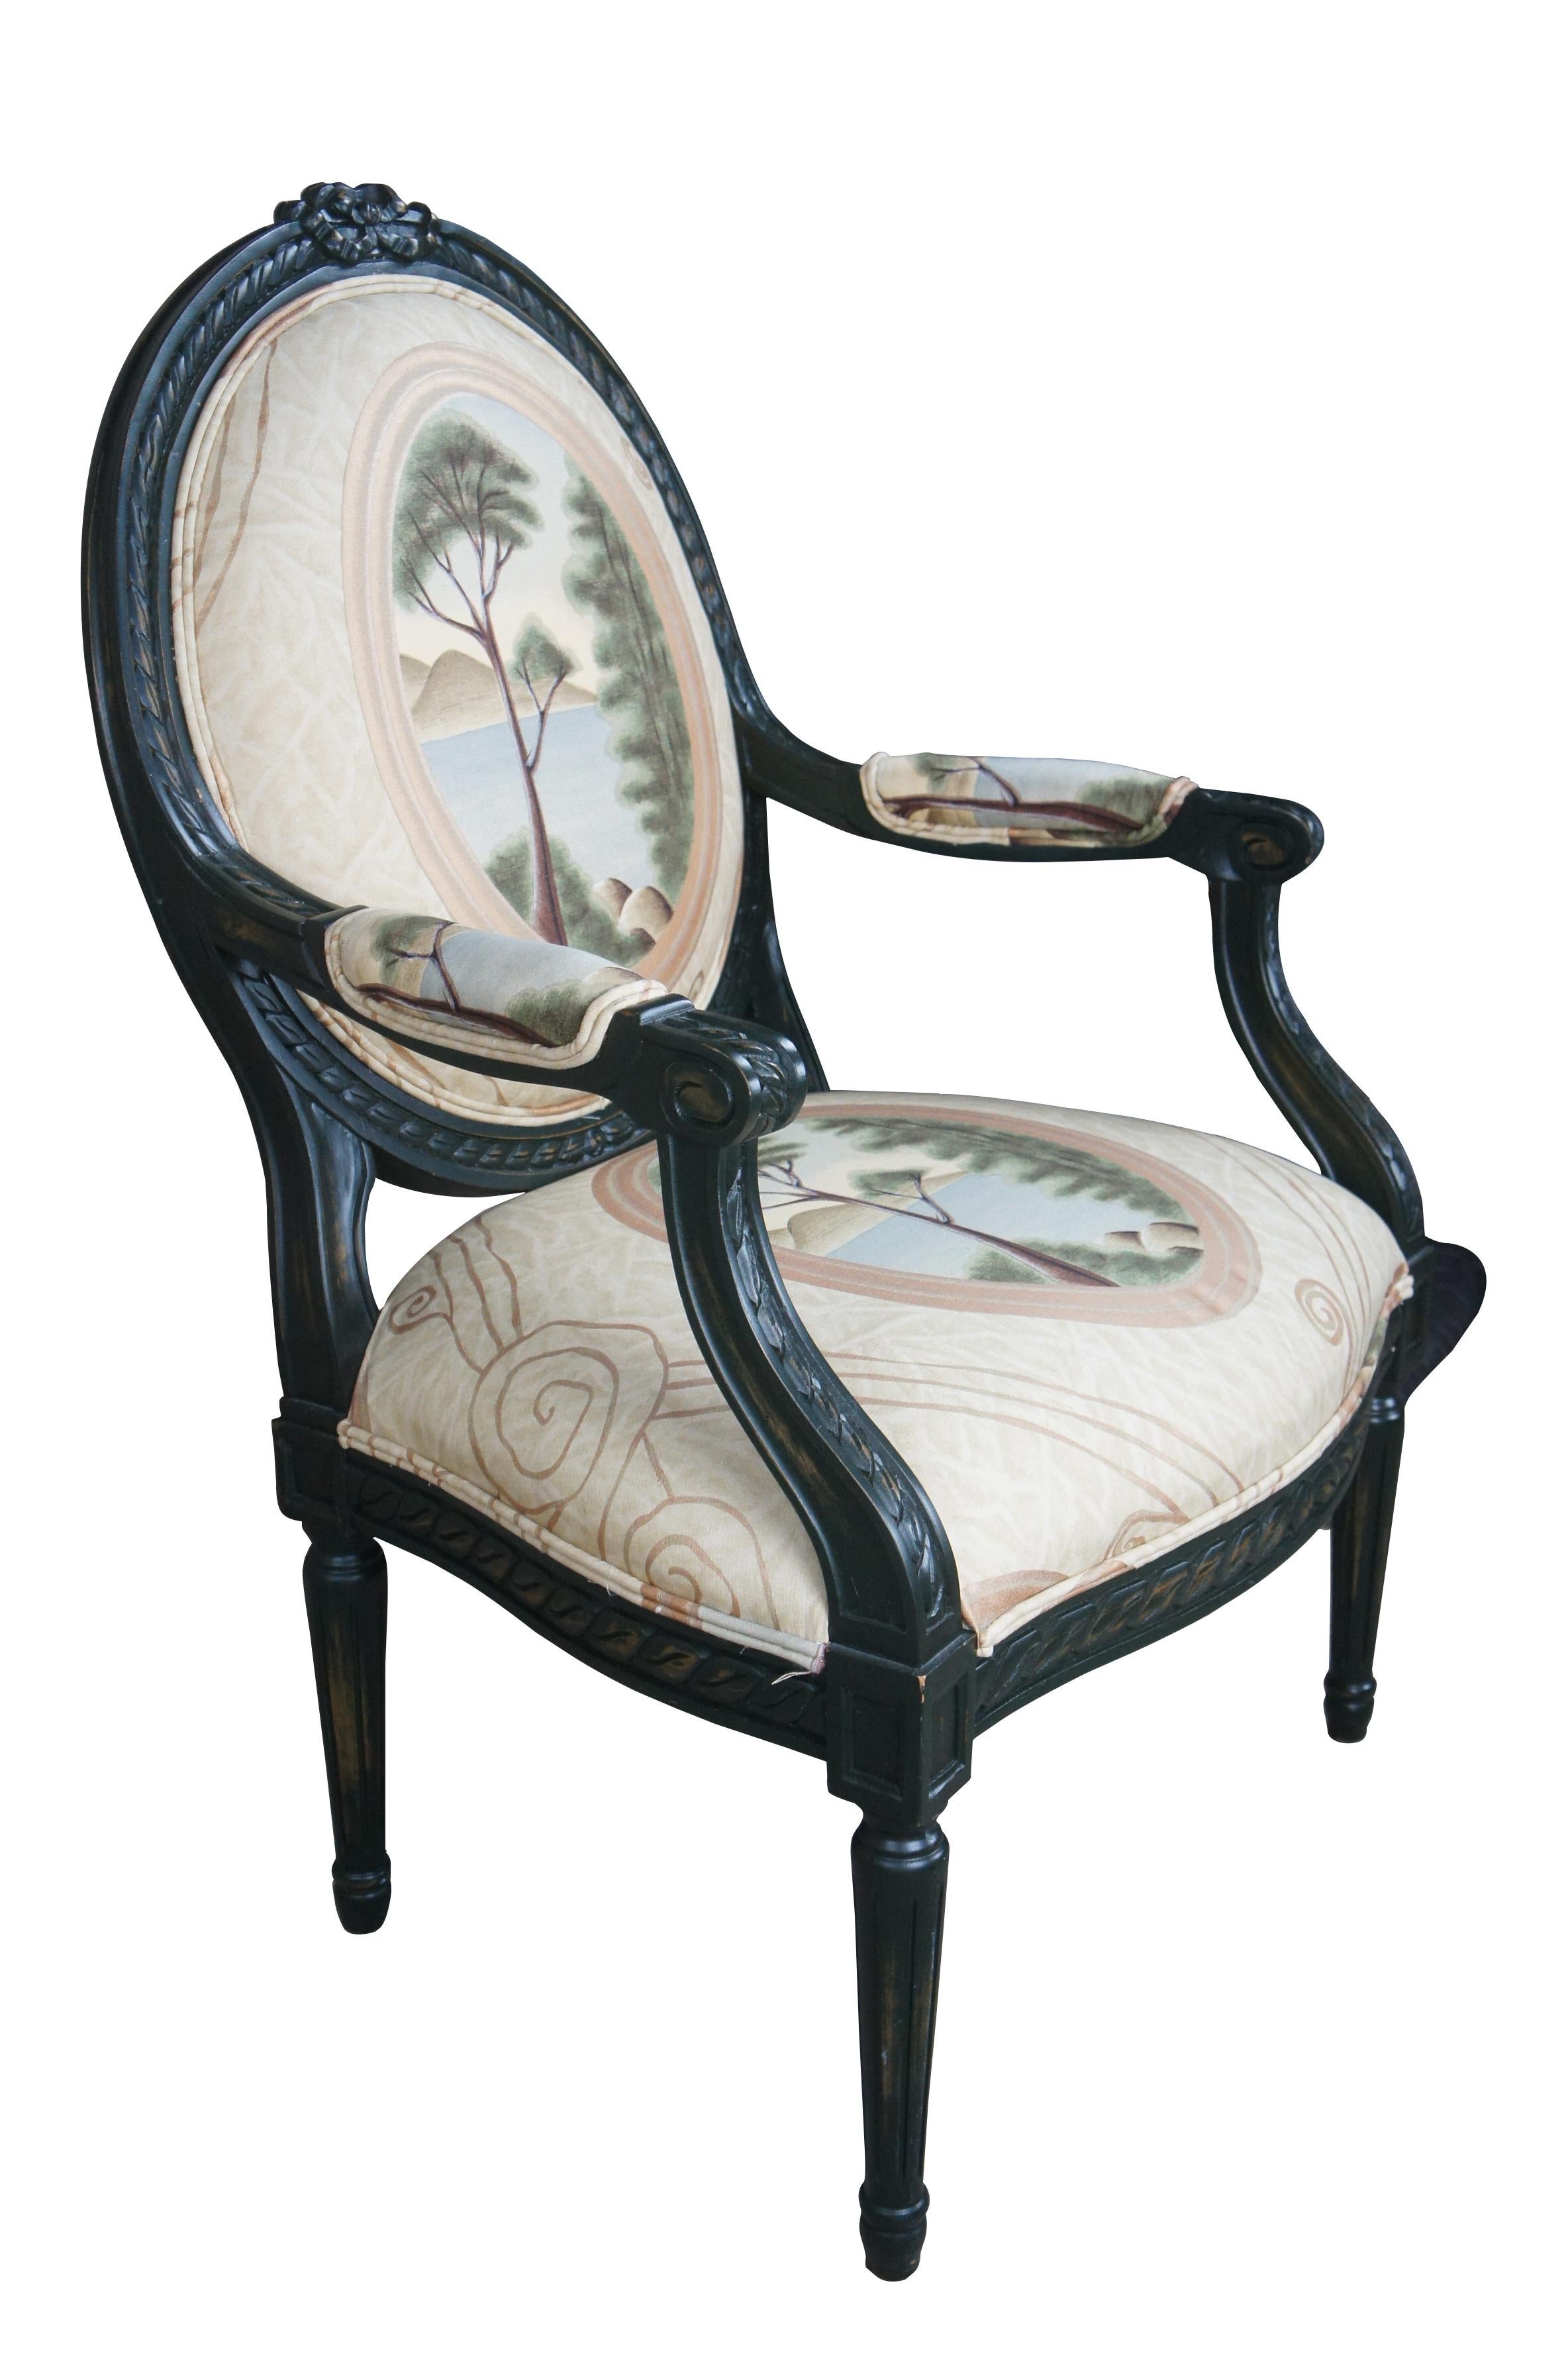 2 Drexel Heritage French Louis XVI Fauteuil Balloon Back Neoclassical Arm Chairs In Good Condition For Sale In Dayton, OH